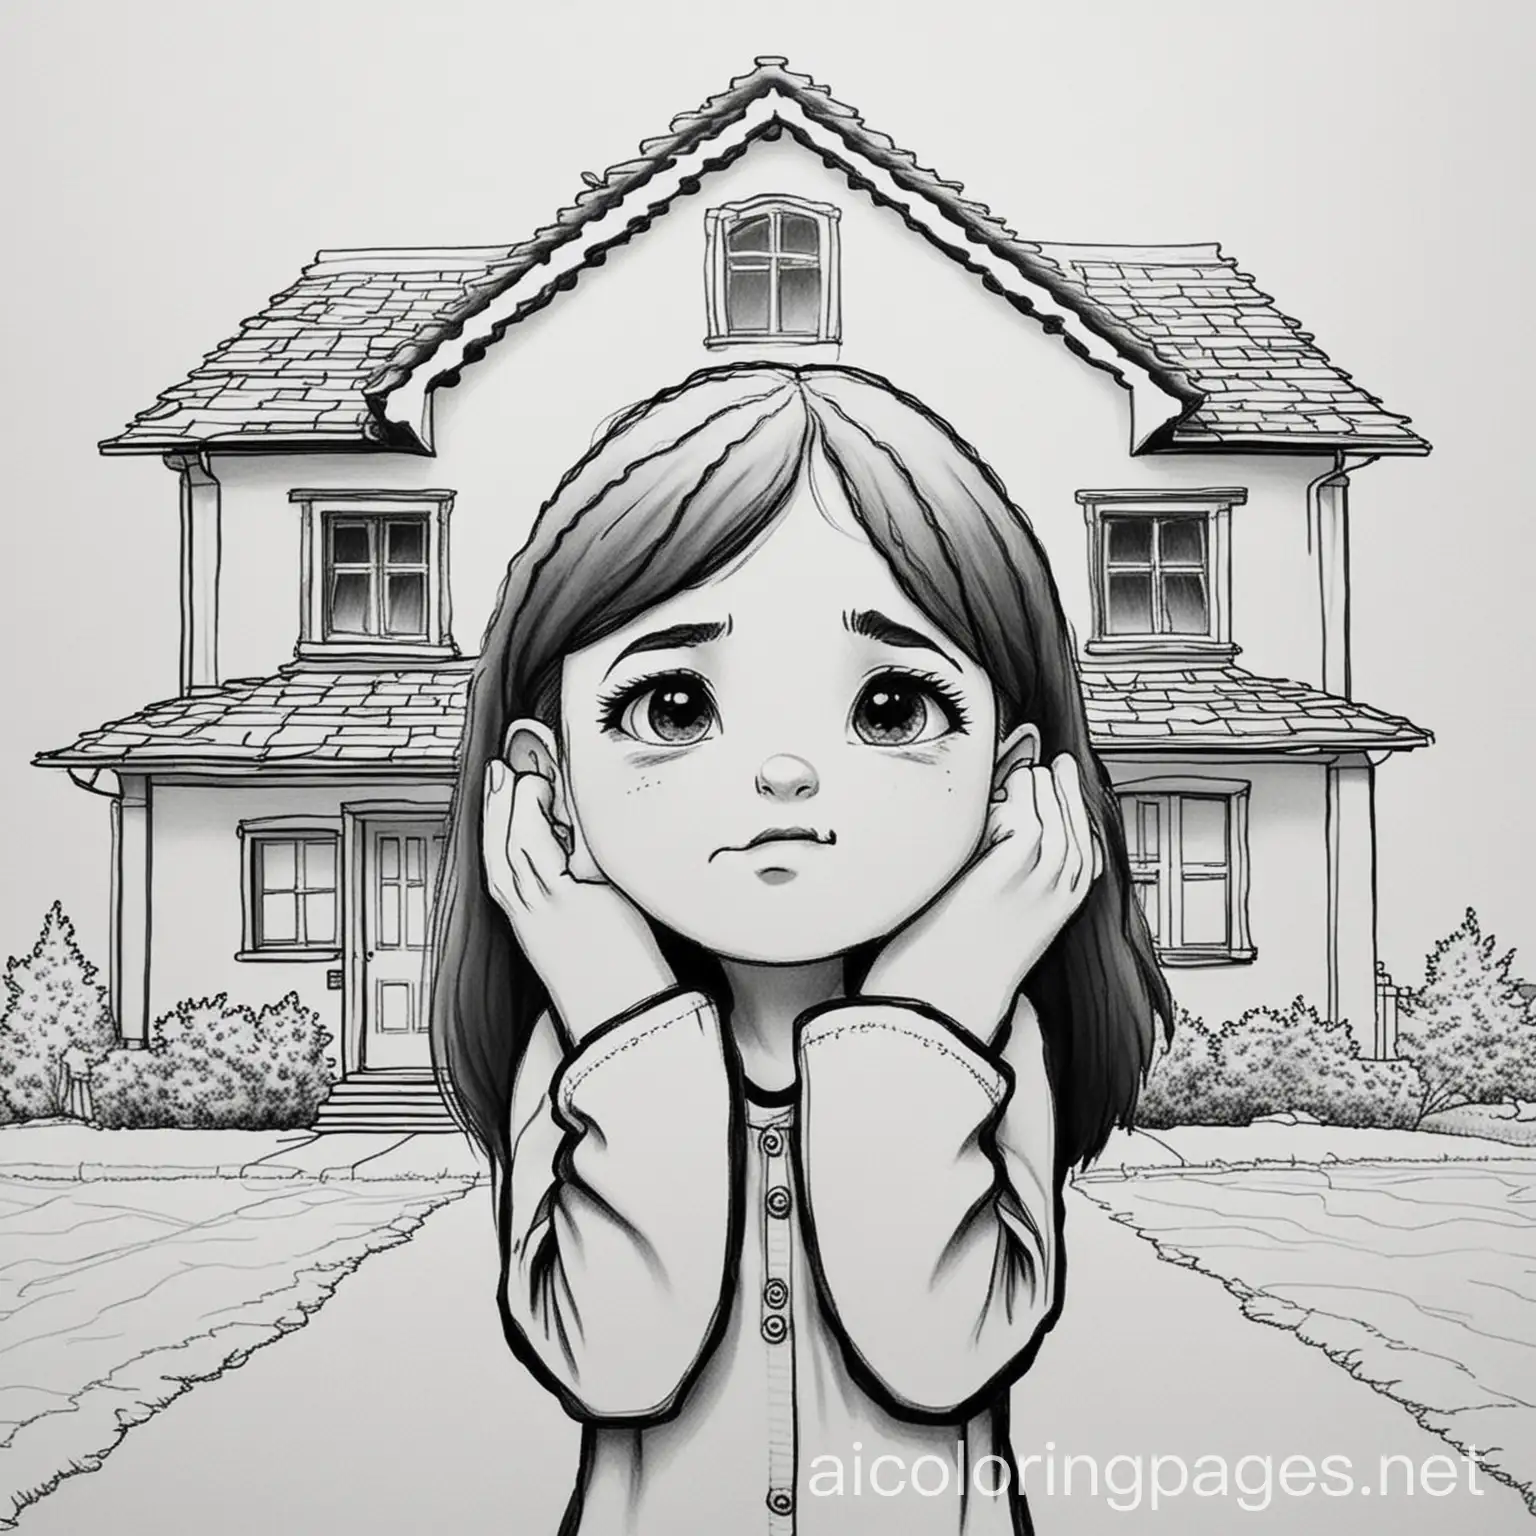 A girl standing with her fists up to her eyes crying with a house behind her. Coloring Page, black and white, line art, white background, Simplicity, Ample White Space. The background of the coloring page is plain white to make it easy for young children to color within the lines. The outlines of all the subjects are easy to distinguish, making it simple for kids to color without too much difficulty. Very simple design , Coloring Page, black and white, line art, white background, Simplicity, Ample White Space. The background of the coloring page is plain white to make it easy for young children to color within the lines. The outlines of all the subjects are easy to distinguish, making it simple for kids to color without too much difficulty